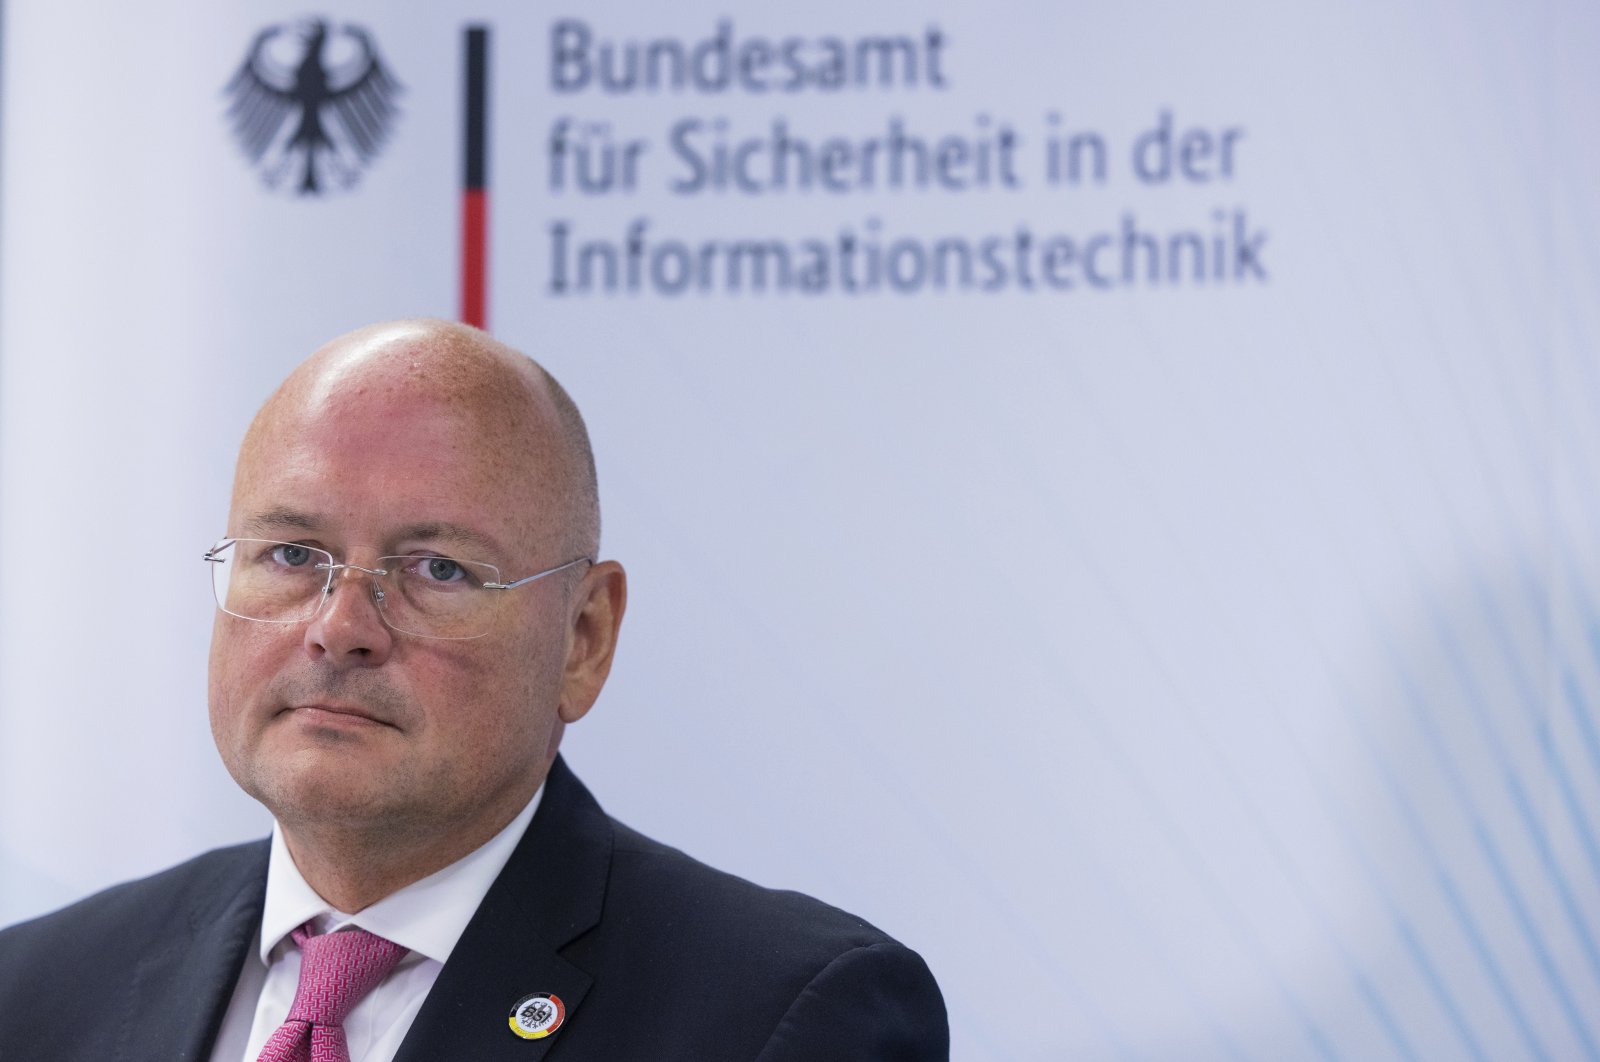 Arne Schoenbohm, president of the Federal Office for Information Security (BSI), attends a press conference in Bonn, Germany, Aug. 8, 2022. (AP Photo)